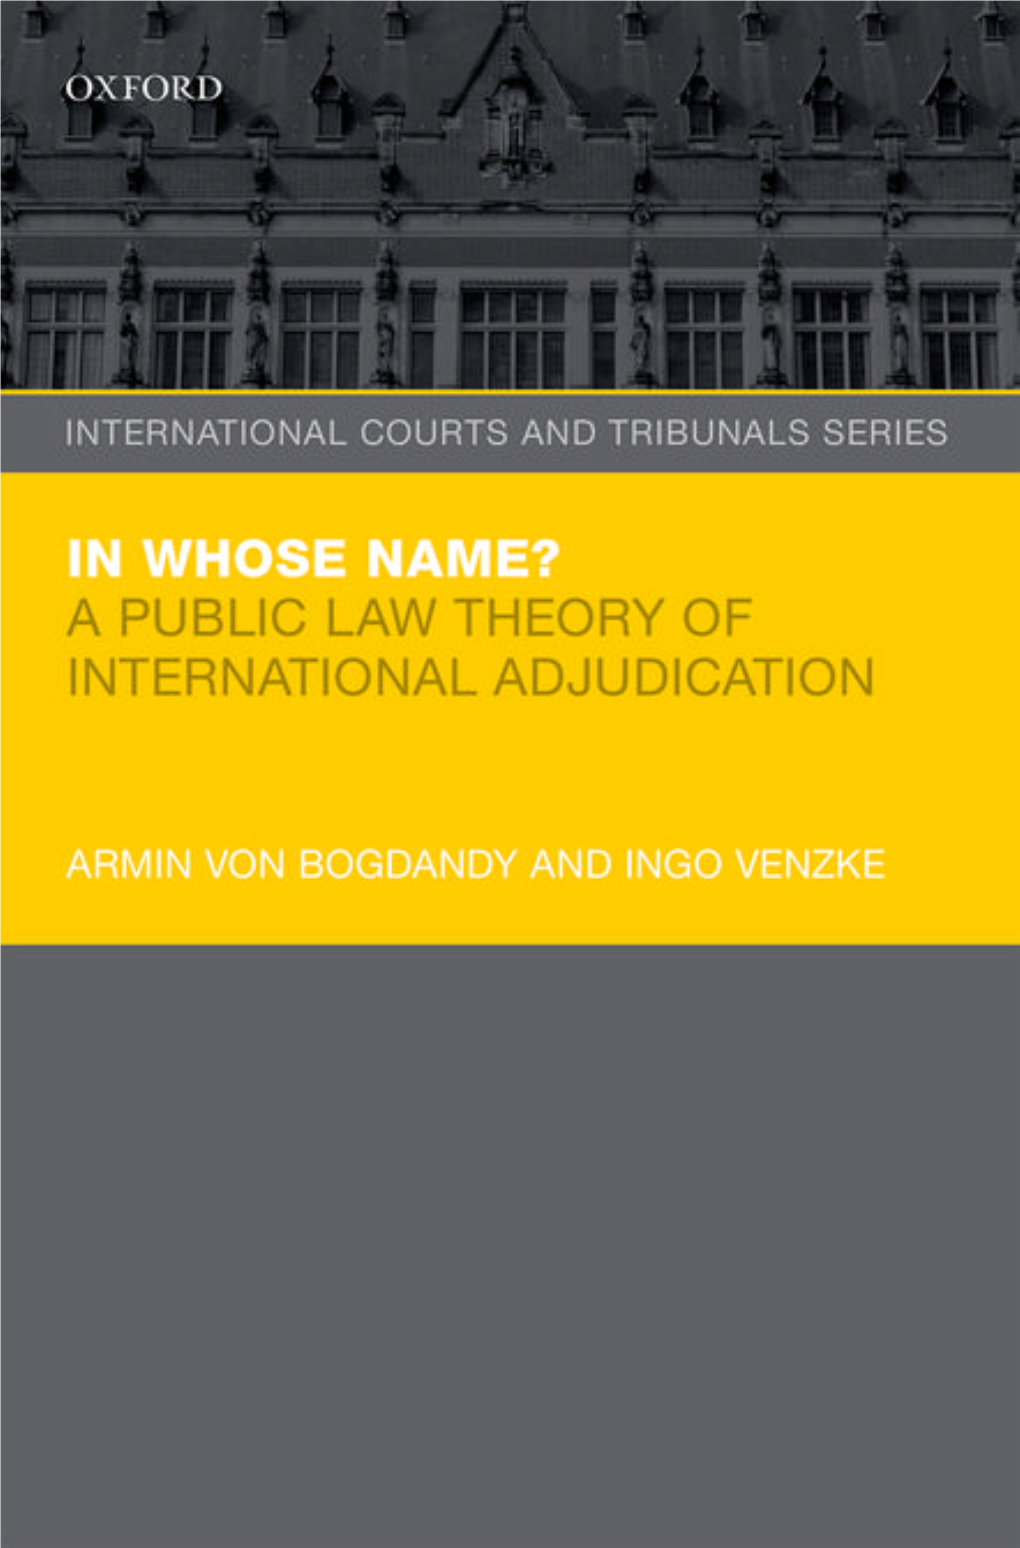 In Whose Name? INTERNATIONAL COURTS and TRIBUNALS SERIES